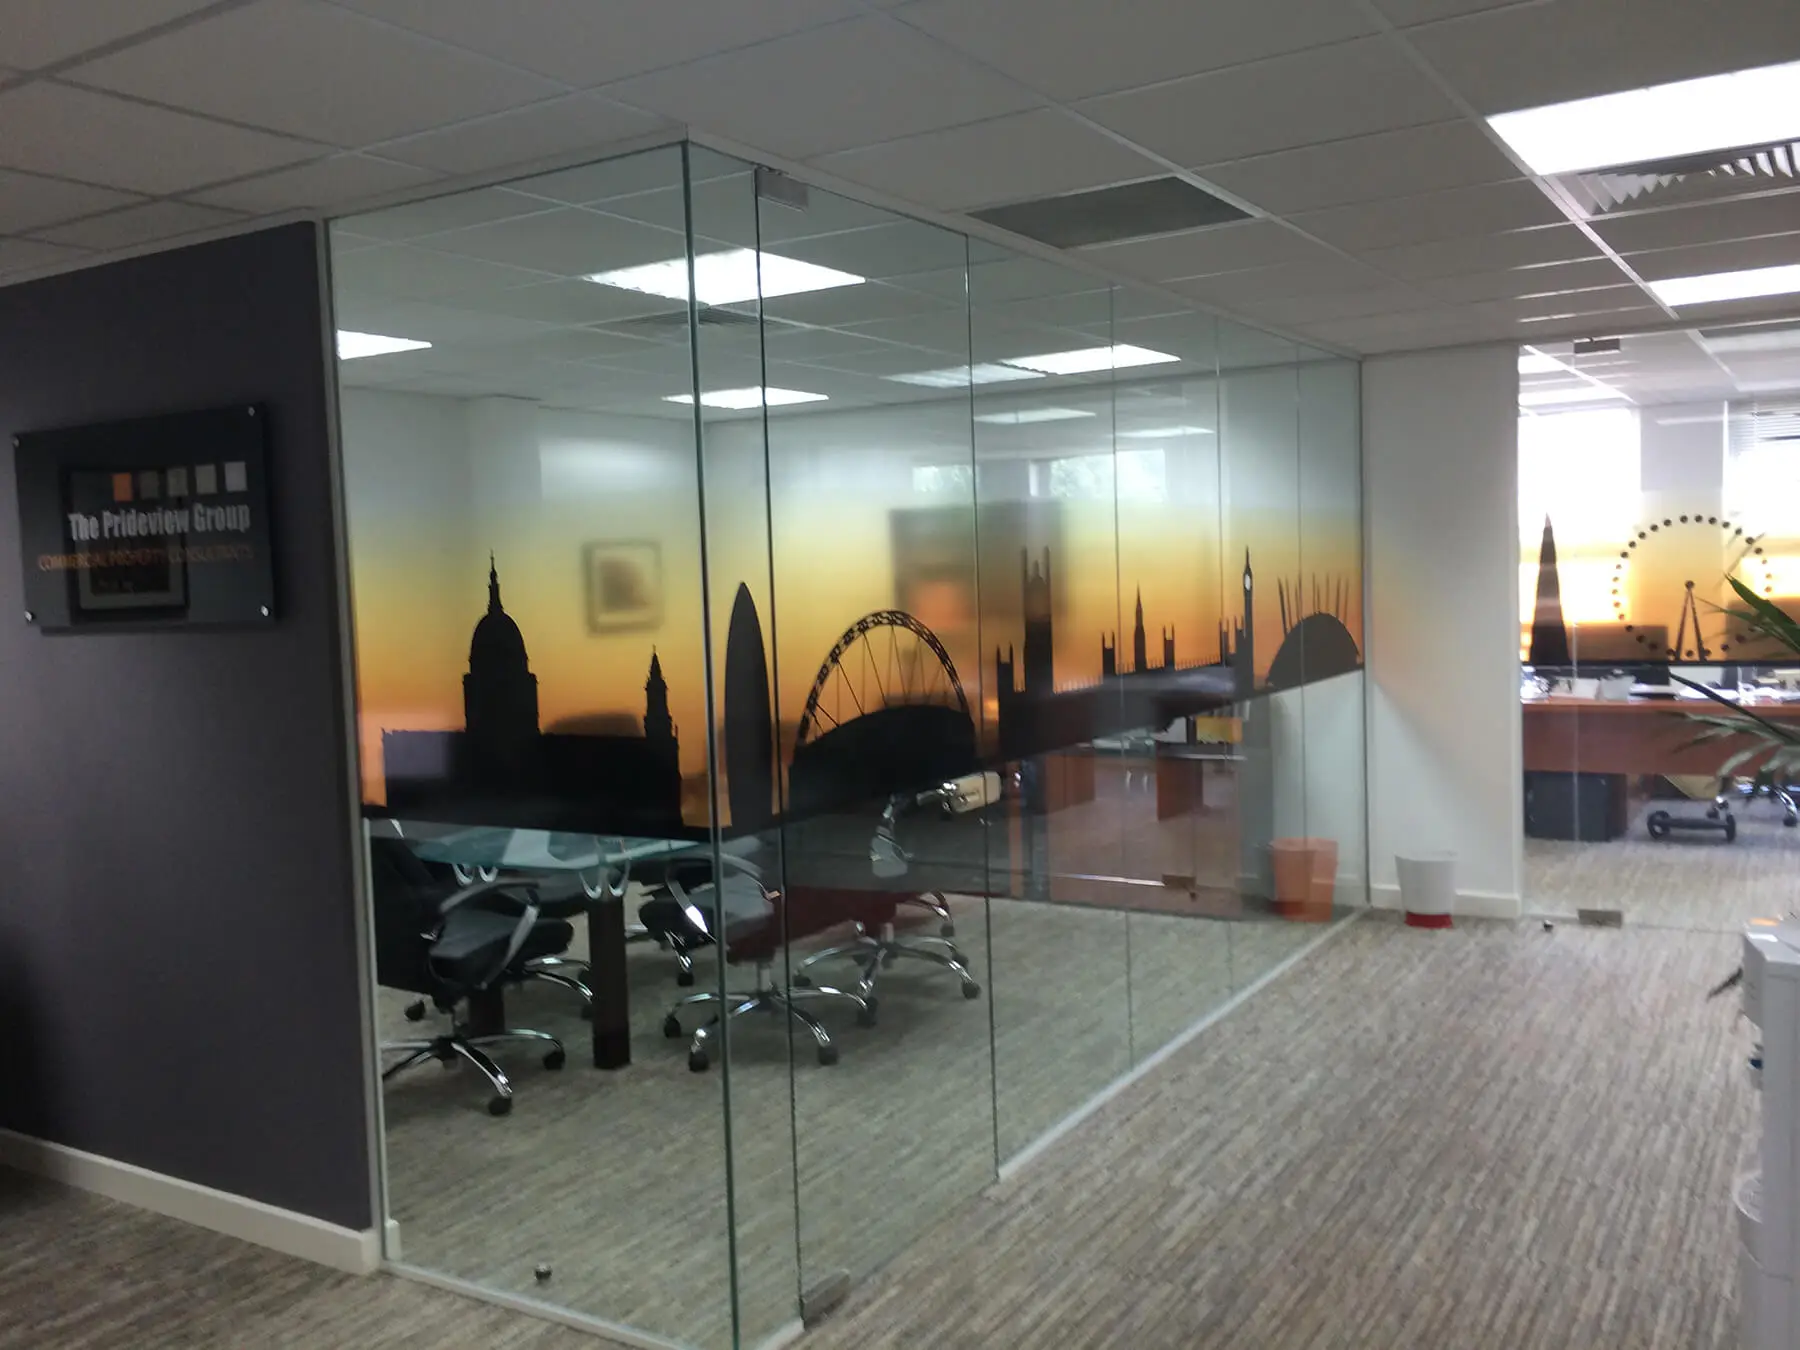 Office space divided with designer glass partitions and with deigner floor